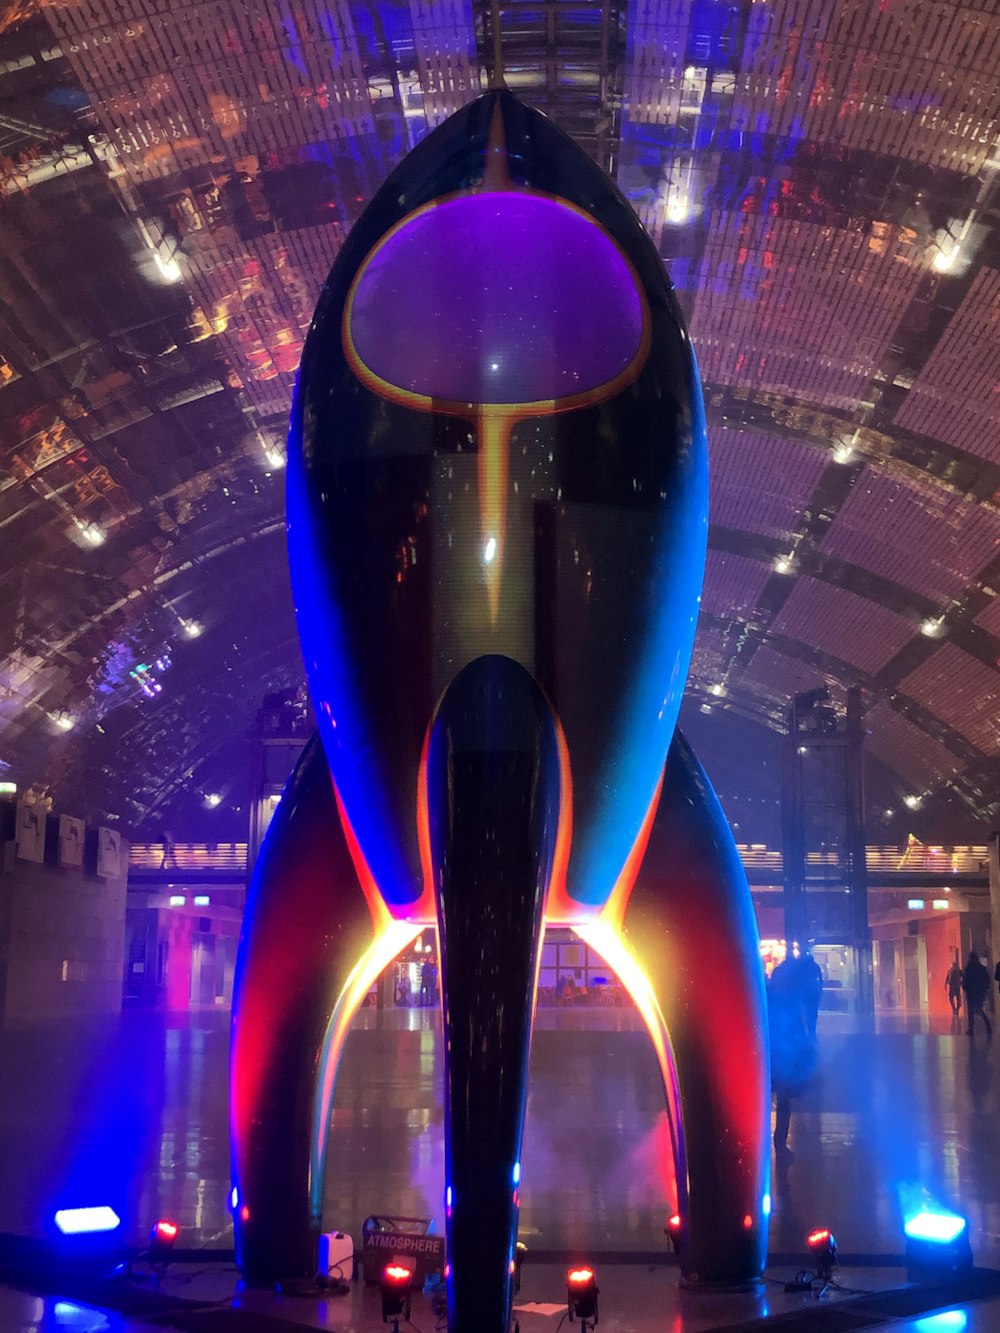 a large colorful object in a large building